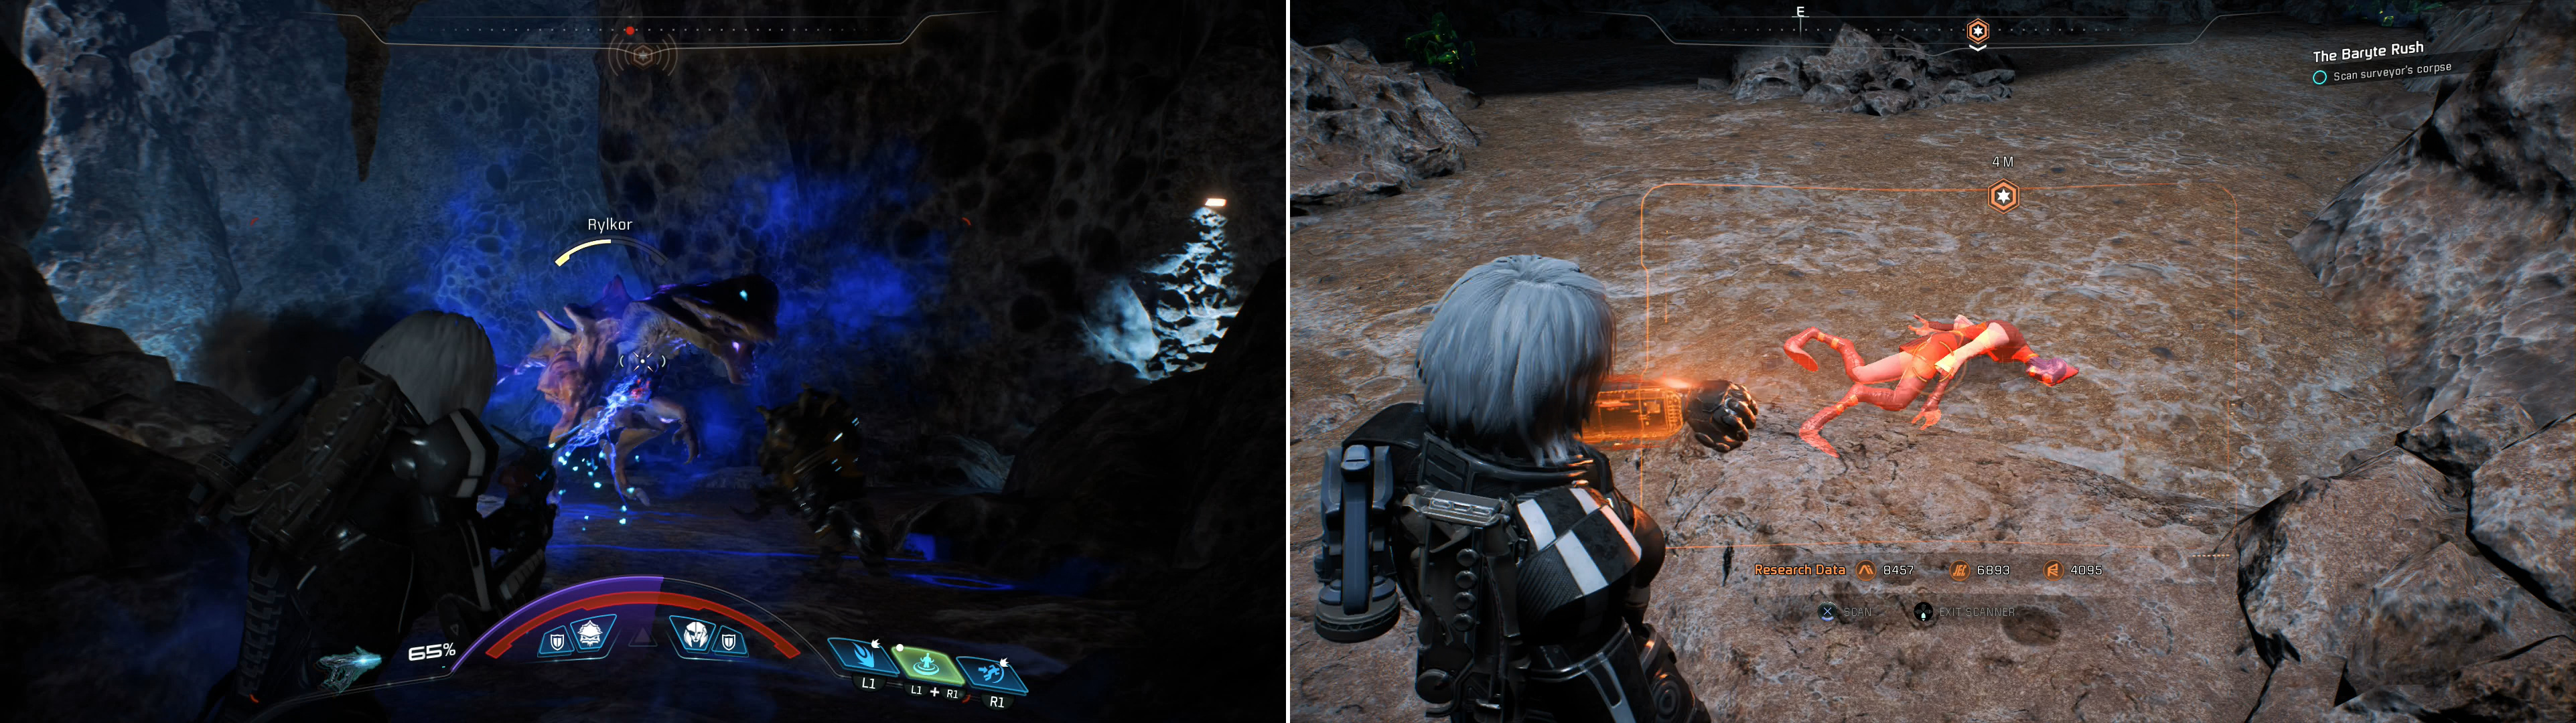 Find the bootlegger near the Kadara settlement site (left) then return to the Nexus to see if Kesh approved of the booze (right).